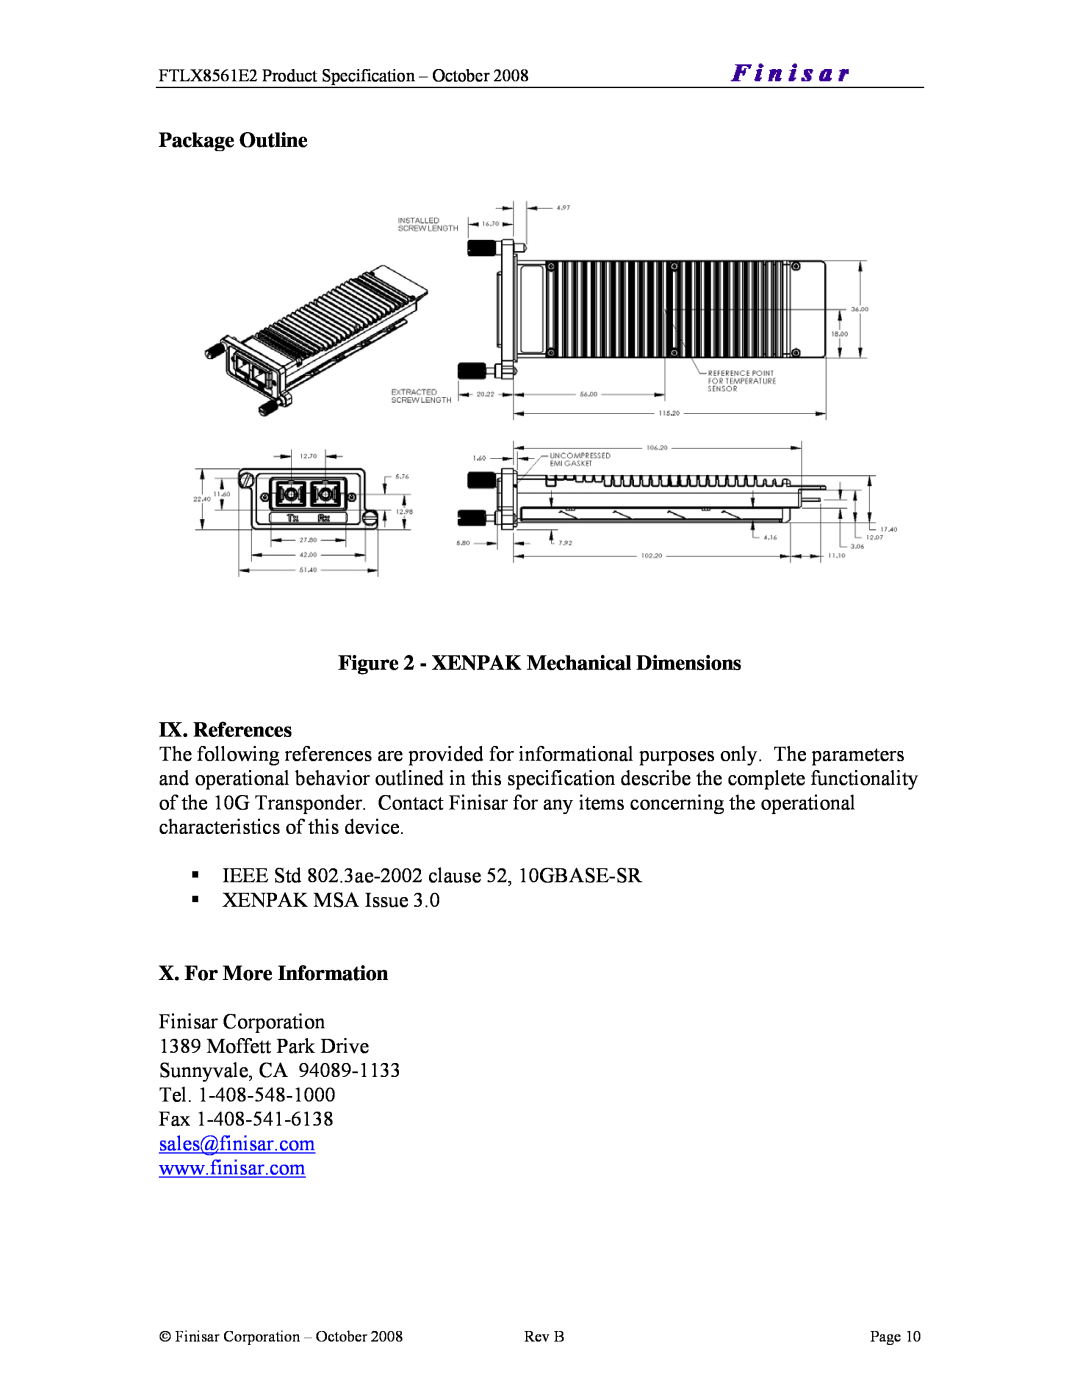 Finisar FTLX8561E2 manual Package Outline - XENPAK Mechanical Dimensions, IX. References, X. For More Information 